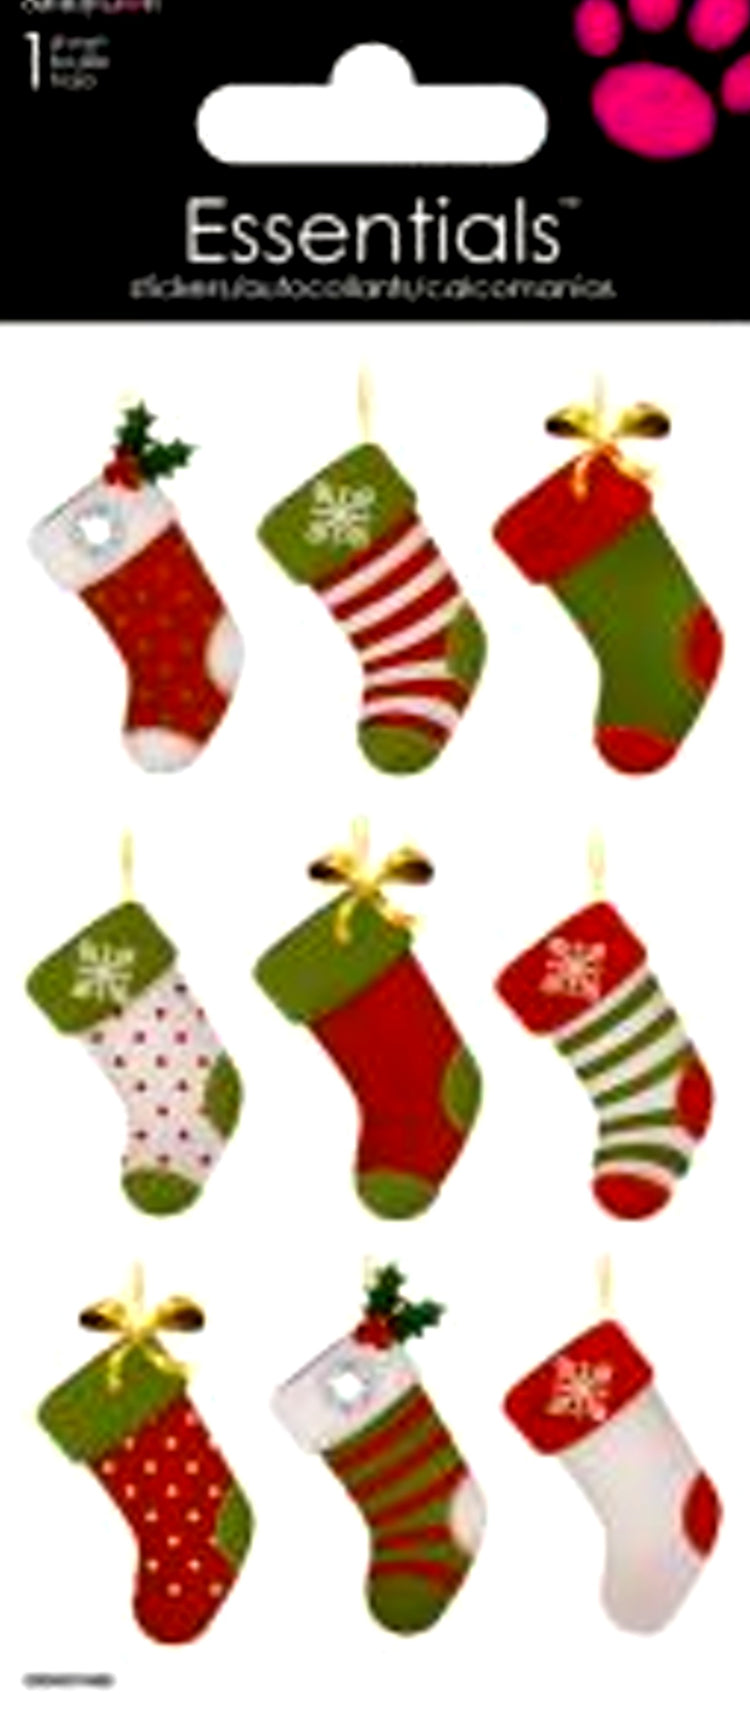 Sandy Lion Essentials Christmas Stockings Dimensional Stickers